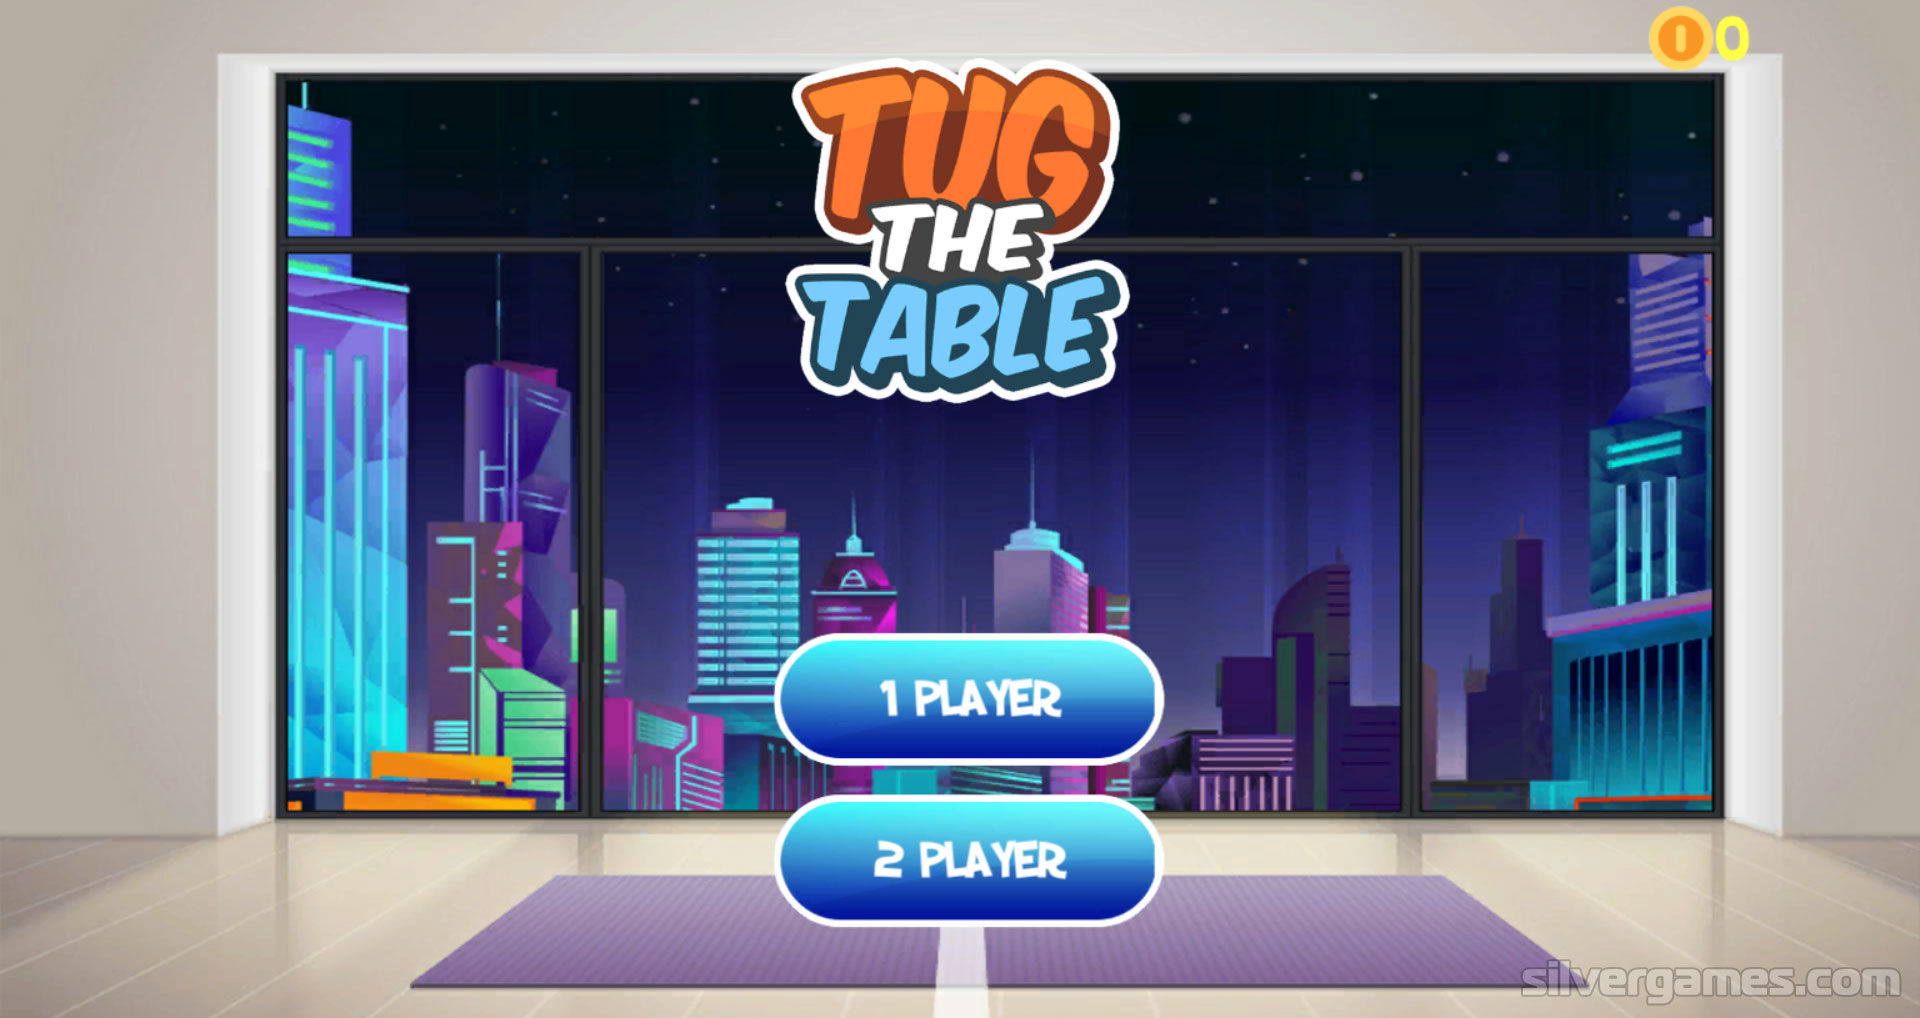 Tug The Table Play Online On Silvergames